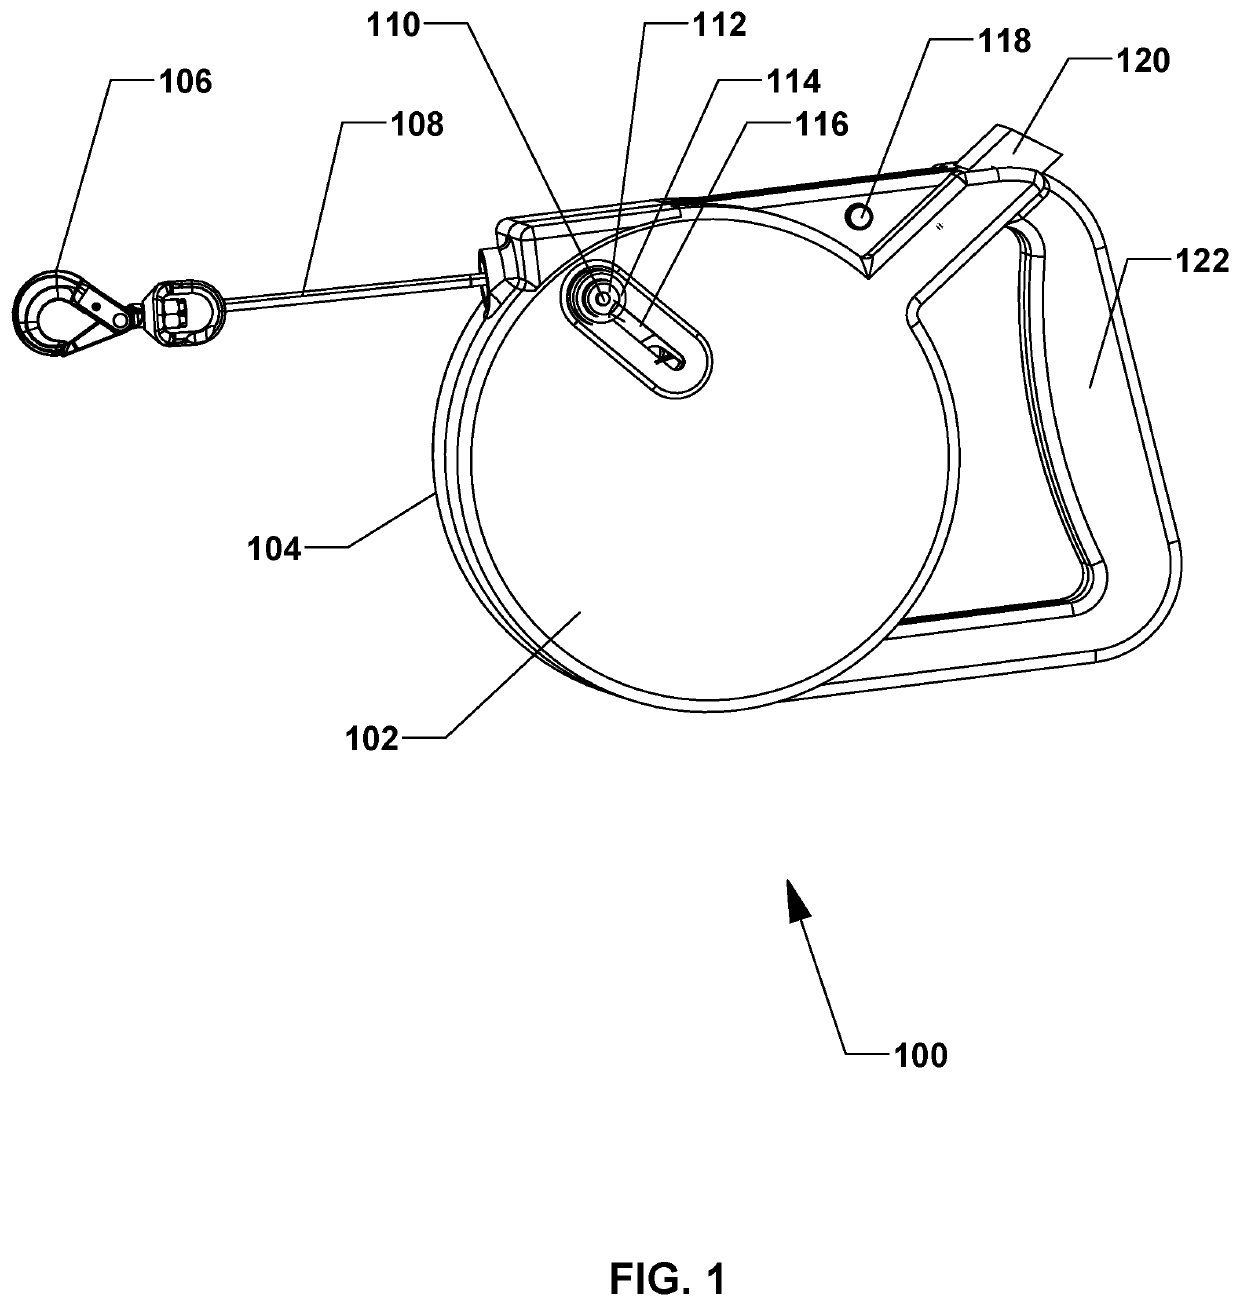 Retractable leash device and method therefor